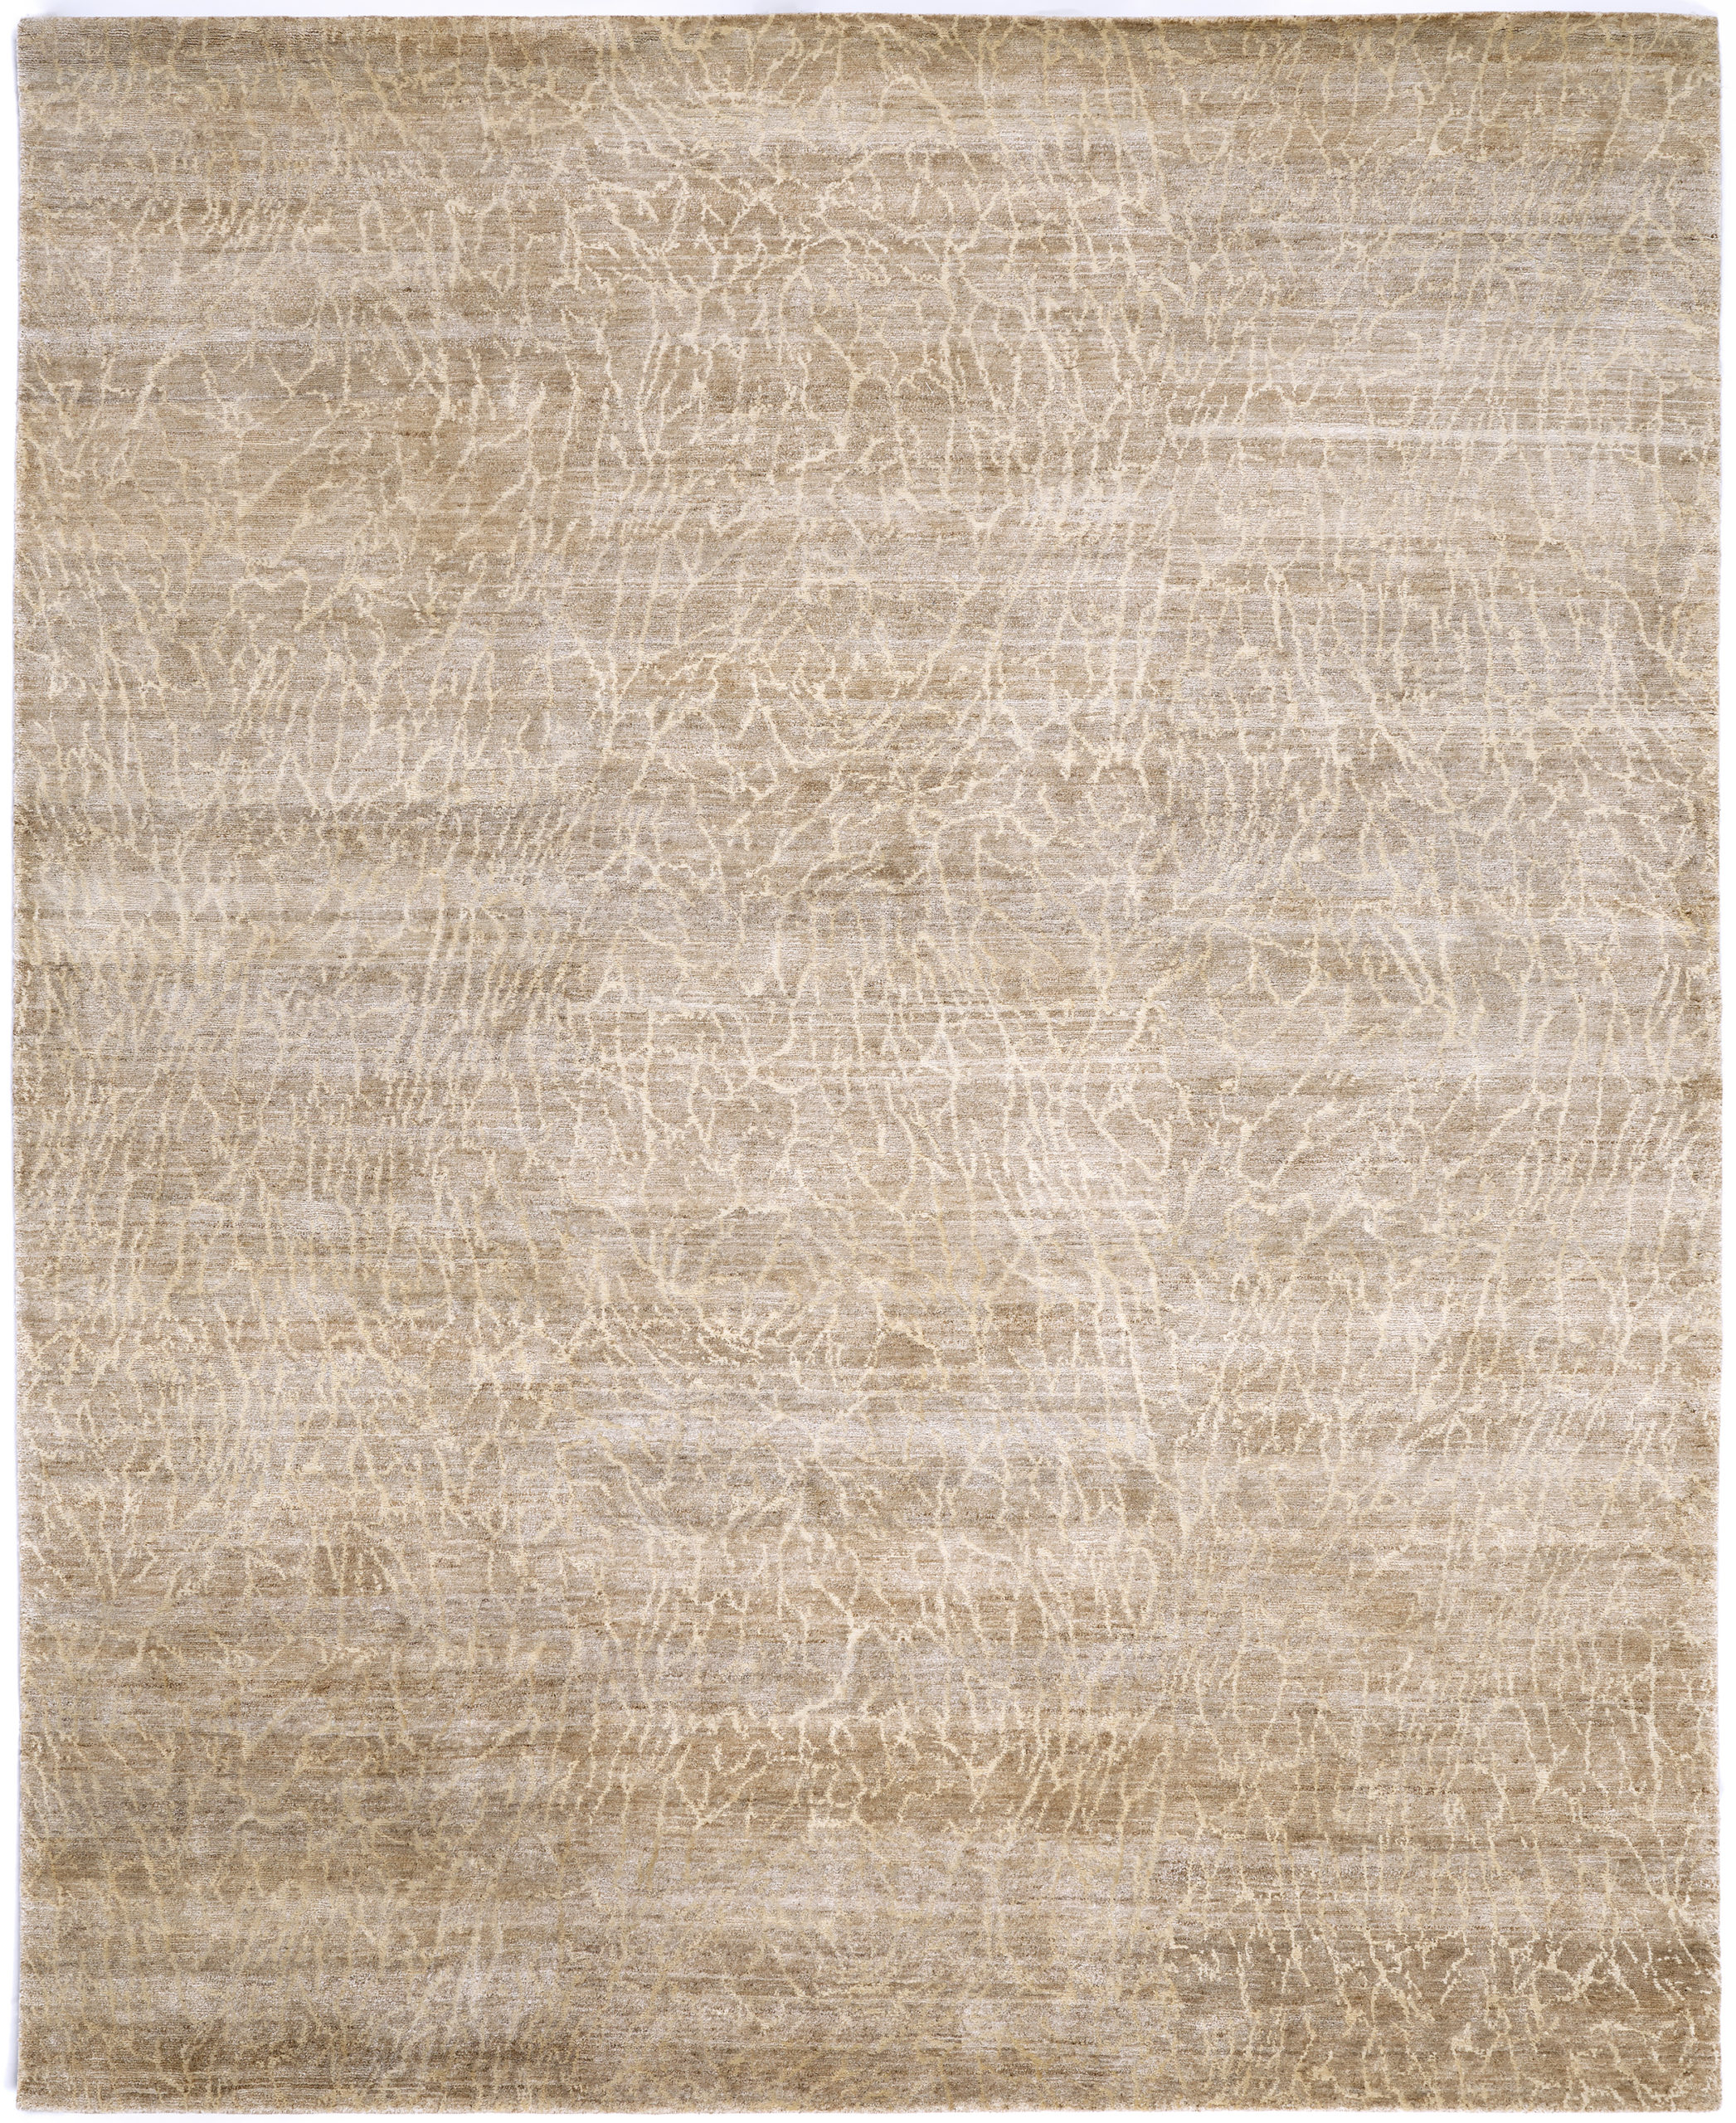 crosby_street_studios_products_CSS_CSS_Elements_Teton_RUG-scaled-1